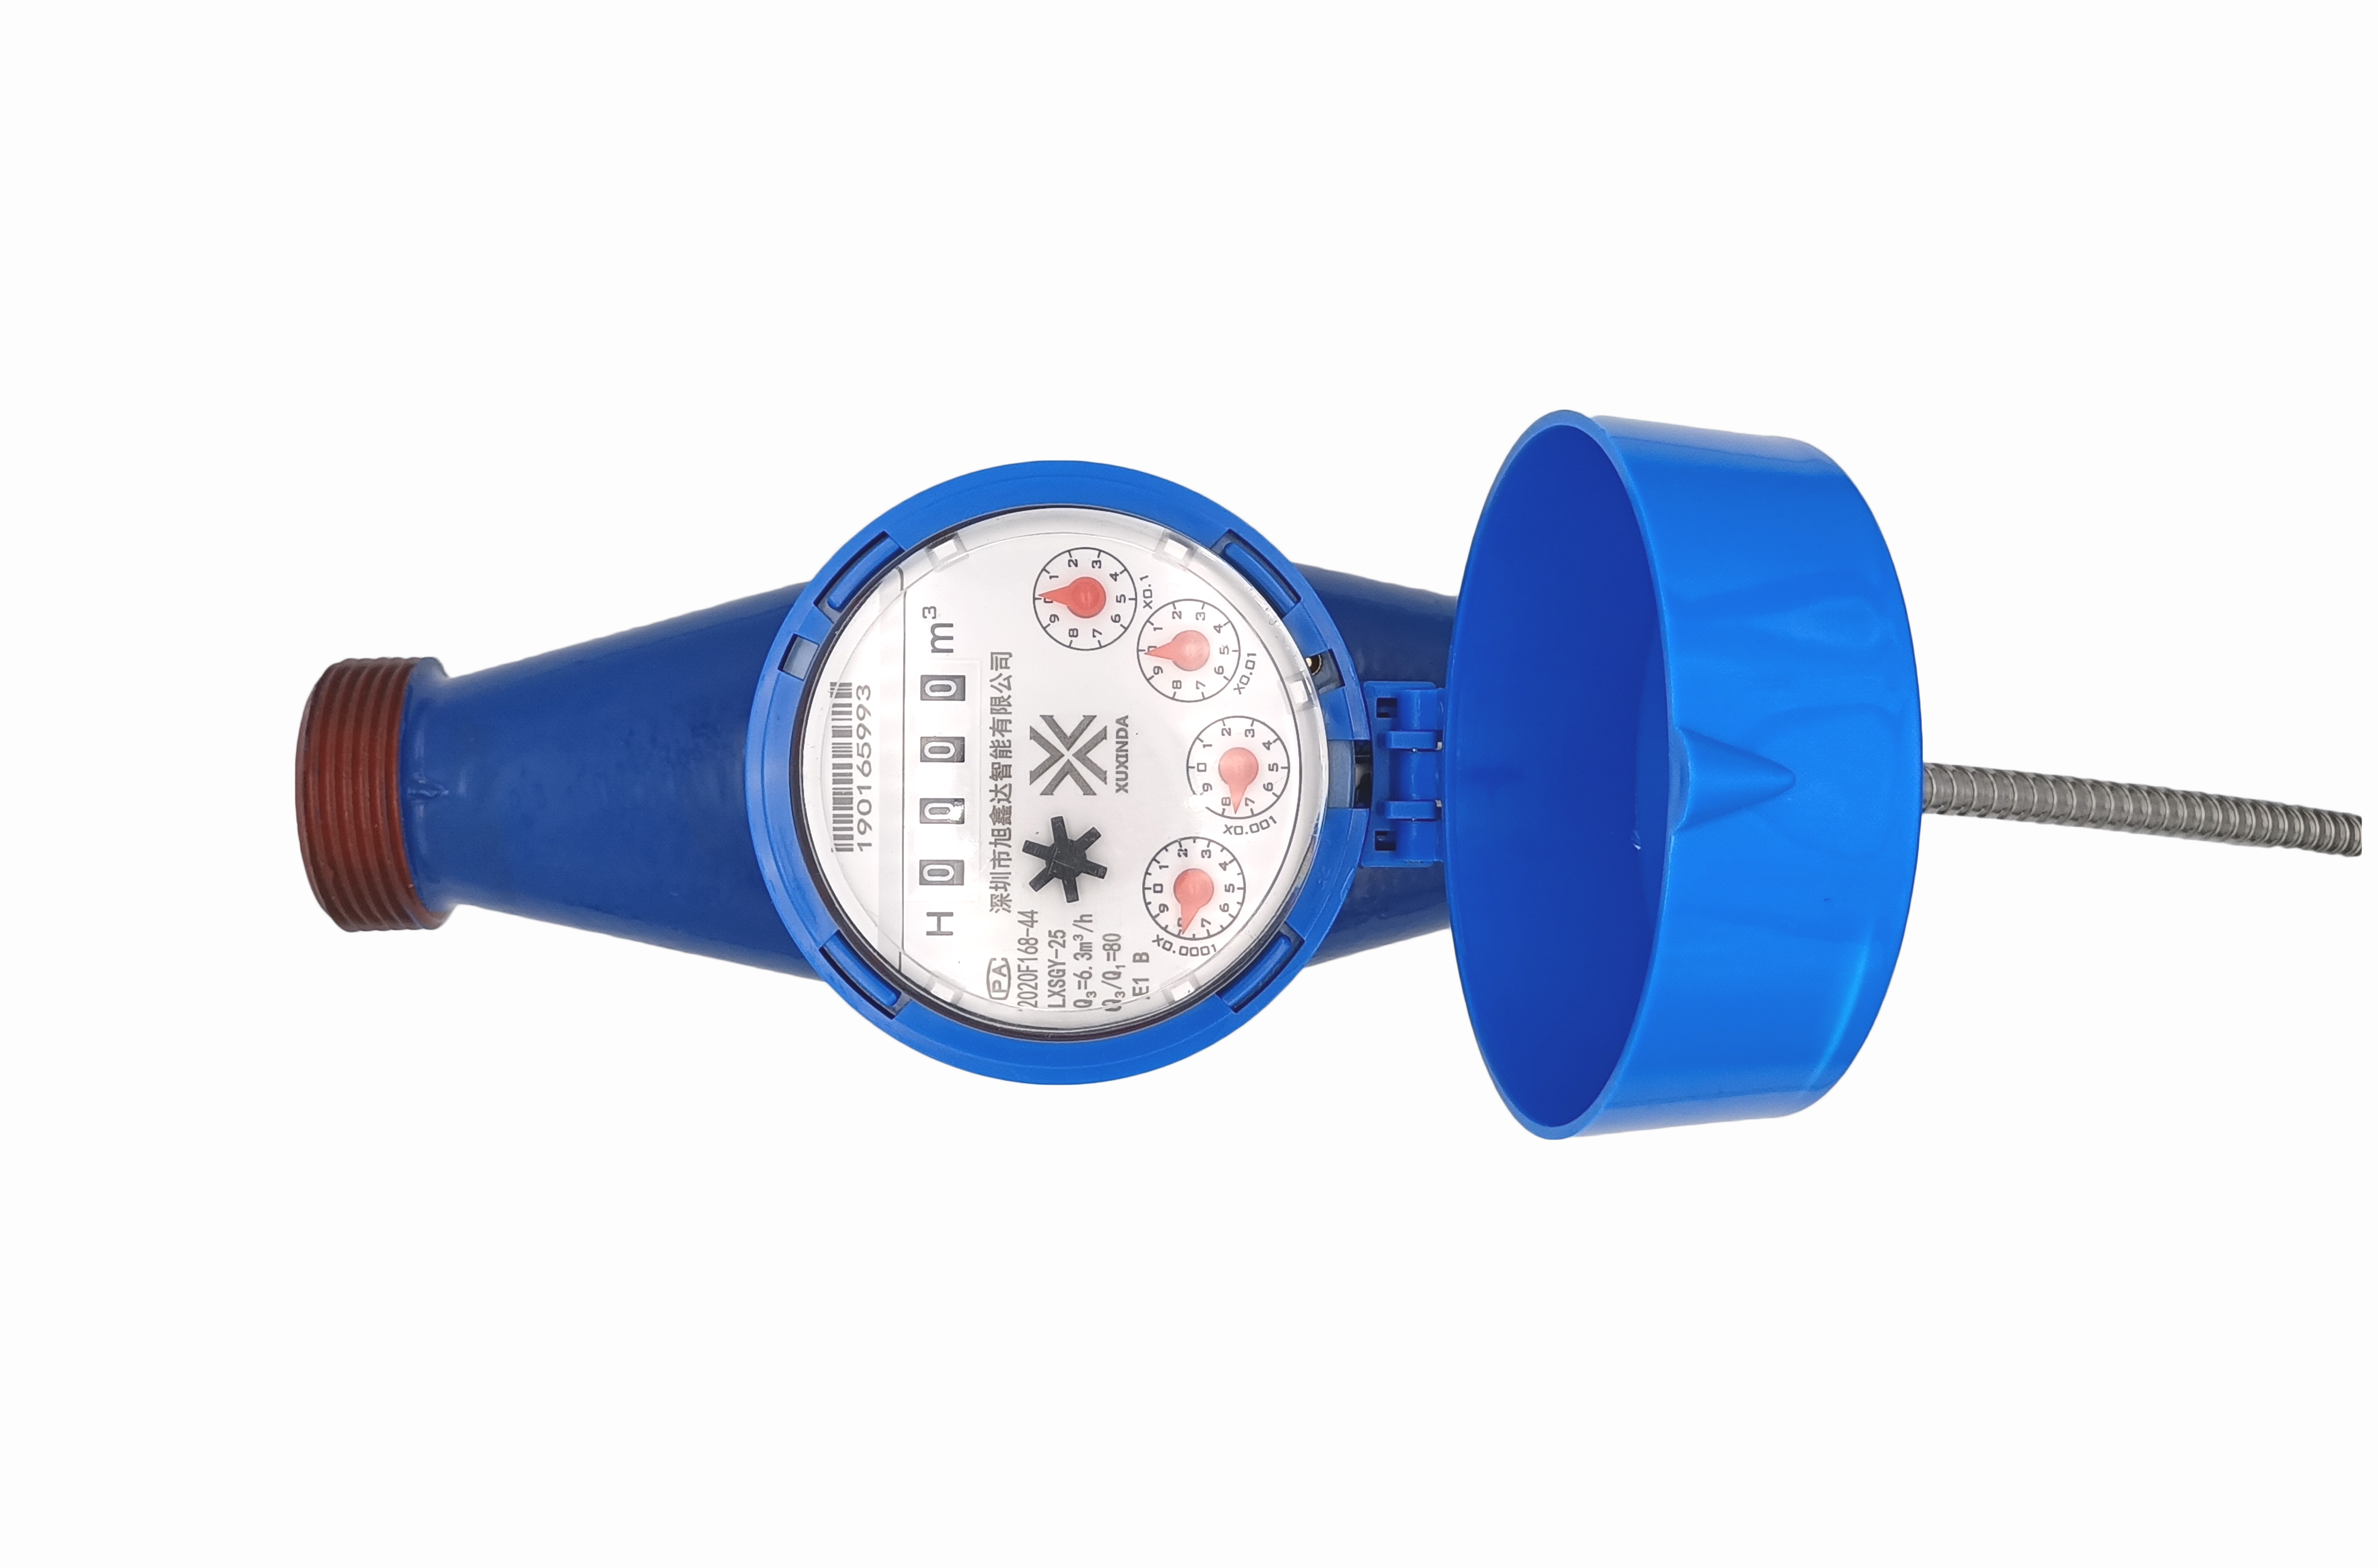 Wired photoelectric direct reading remote water meter